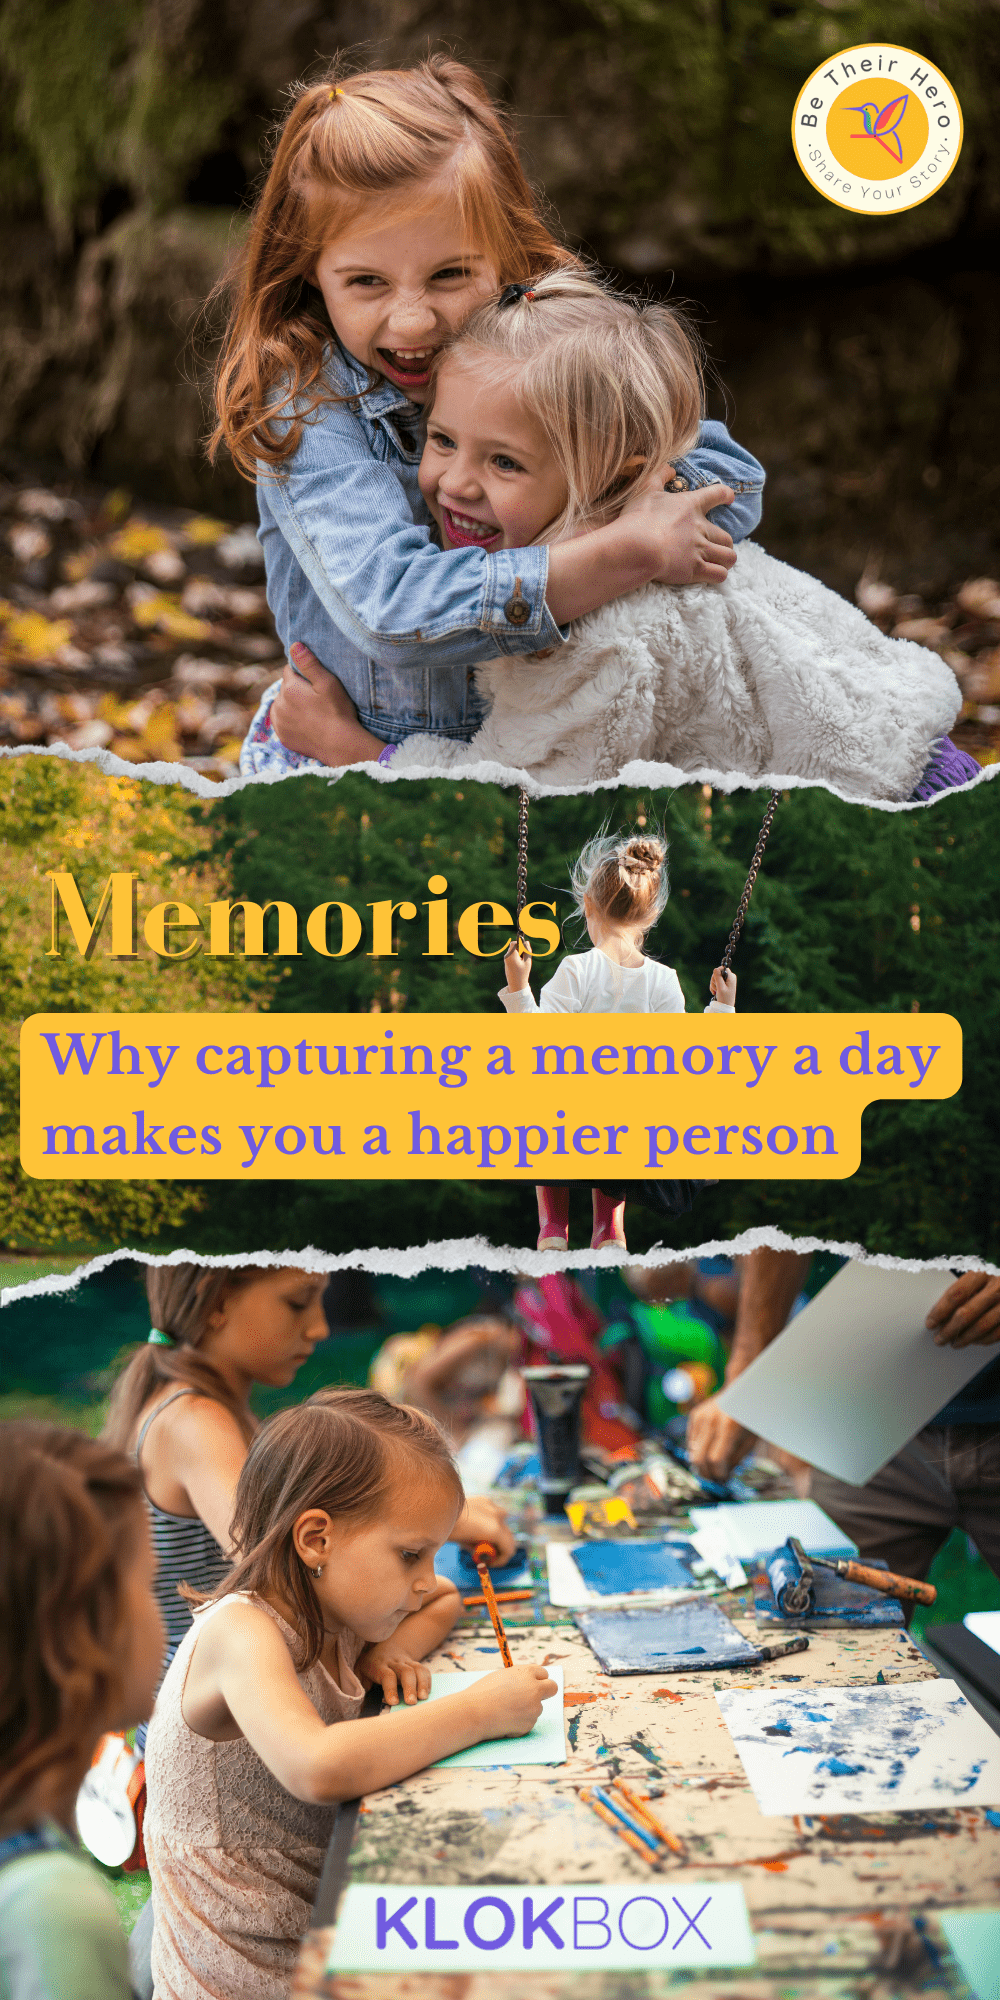 Why capturing a memory a day makes you a happier person